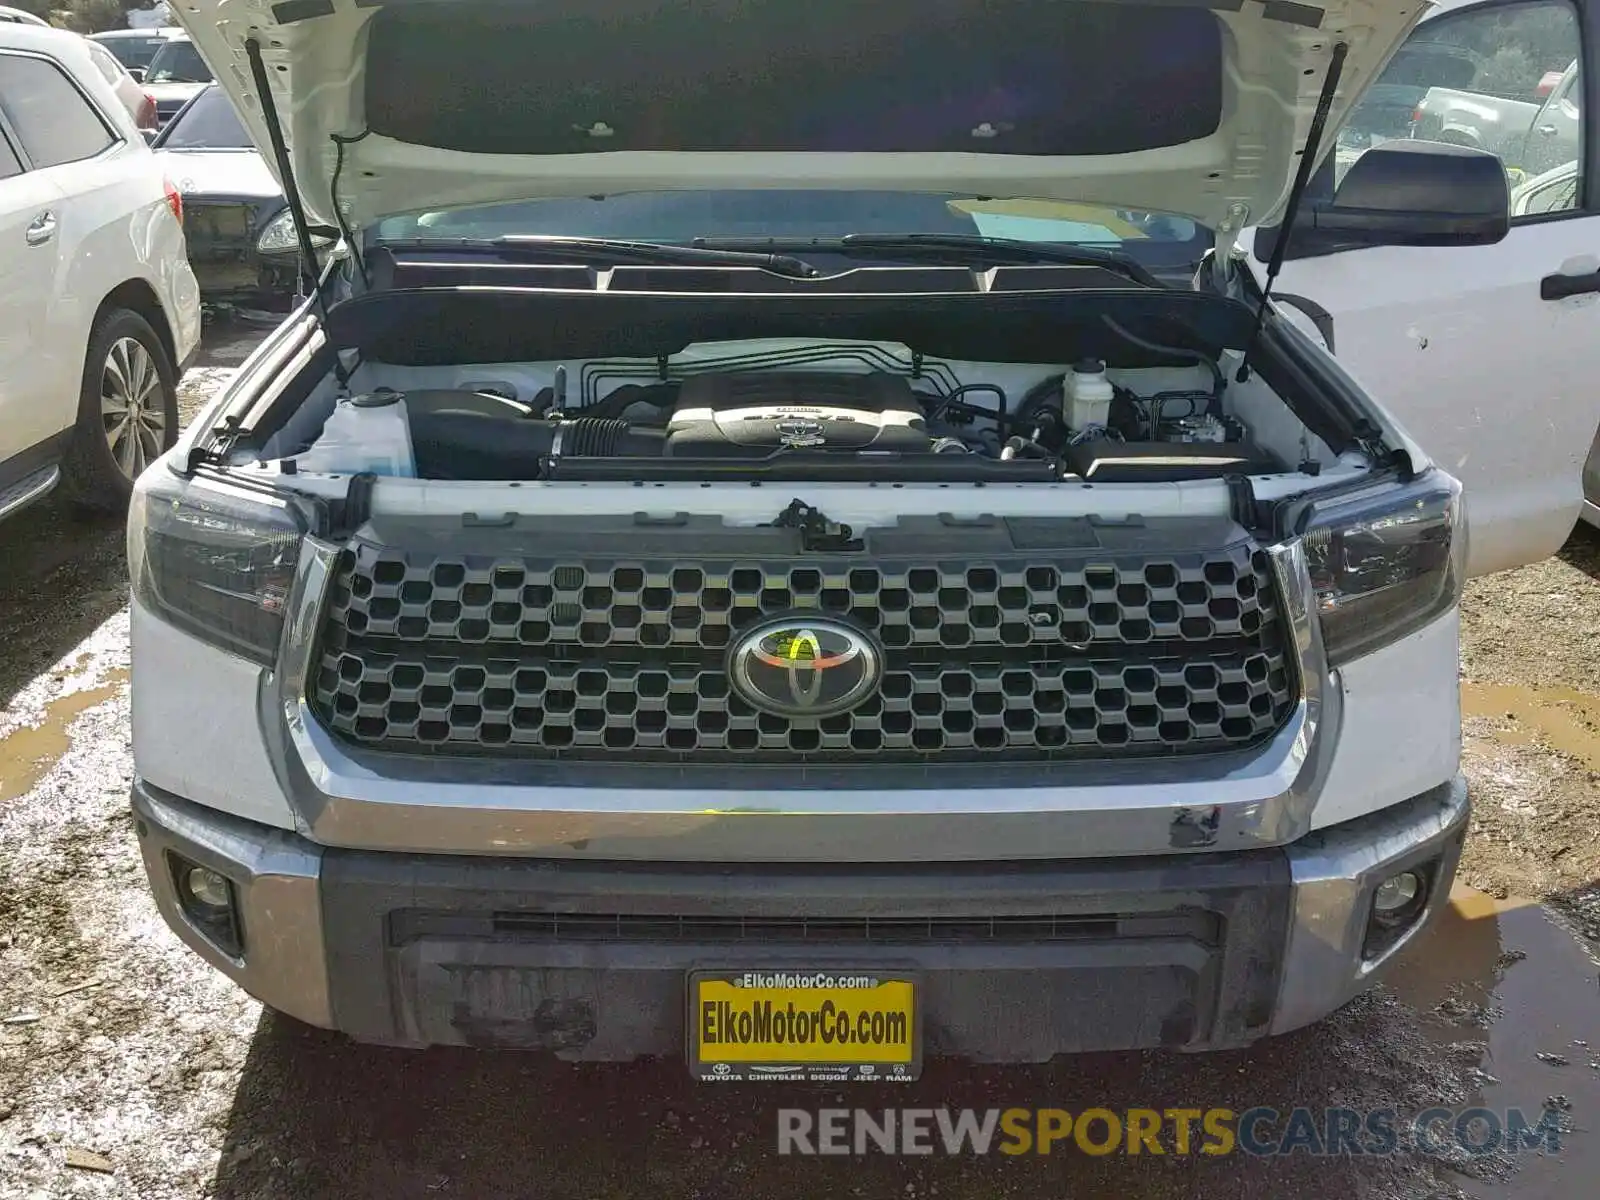 7 Photograph of a damaged car 5TFDY5F1XKX806347 TOYOTA TUNDRA CRE 2019